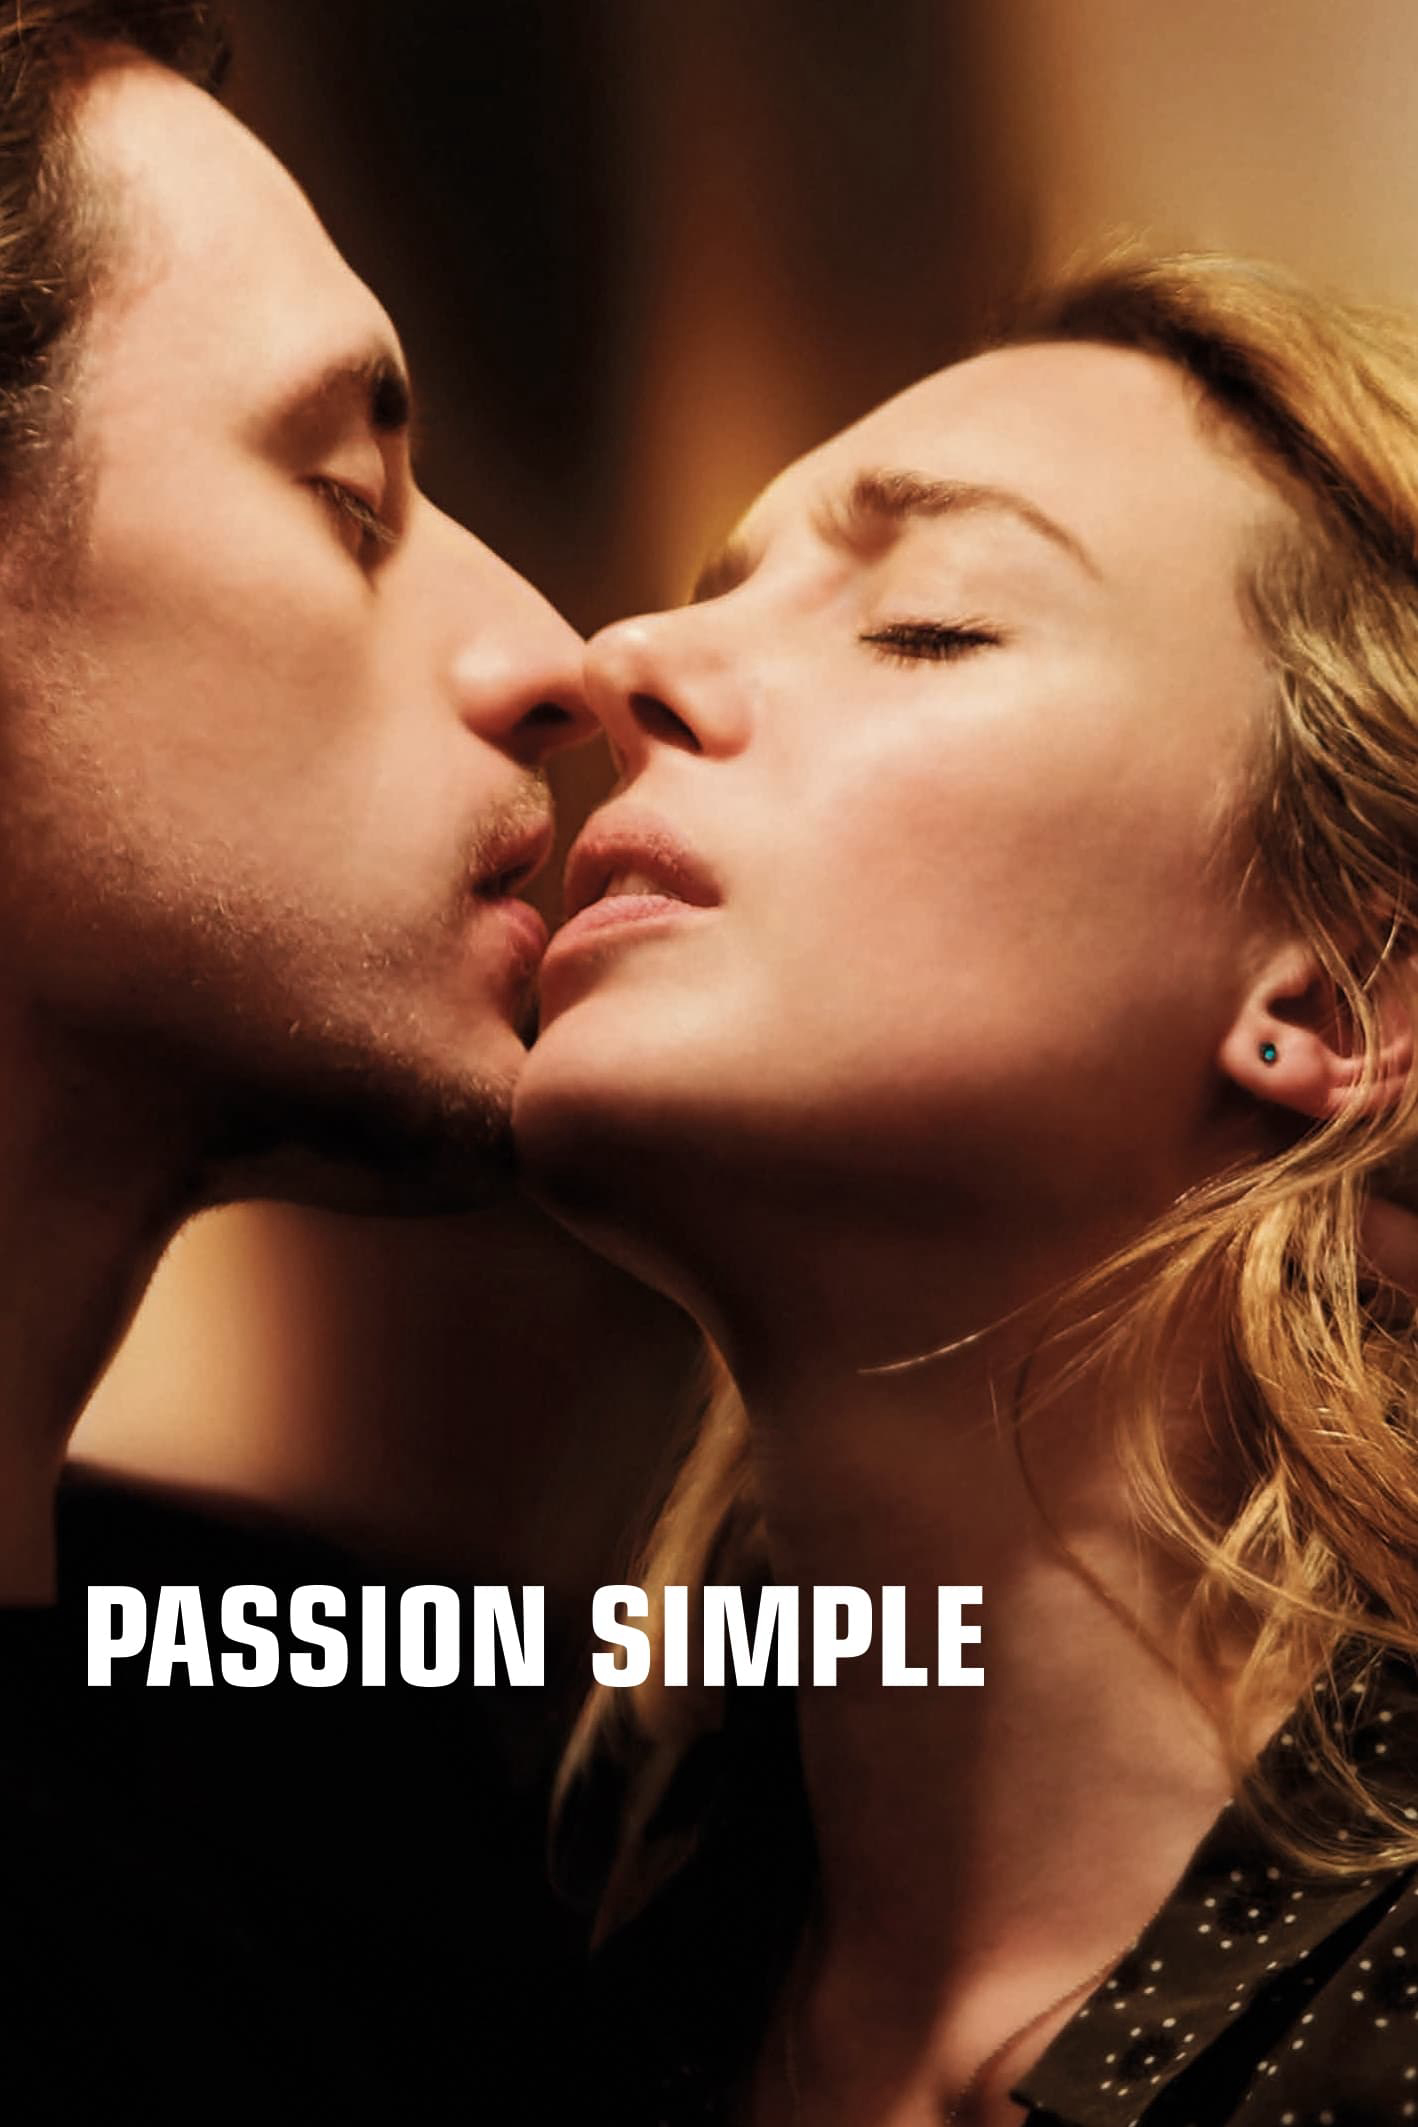 Passion simple - Simple Passion